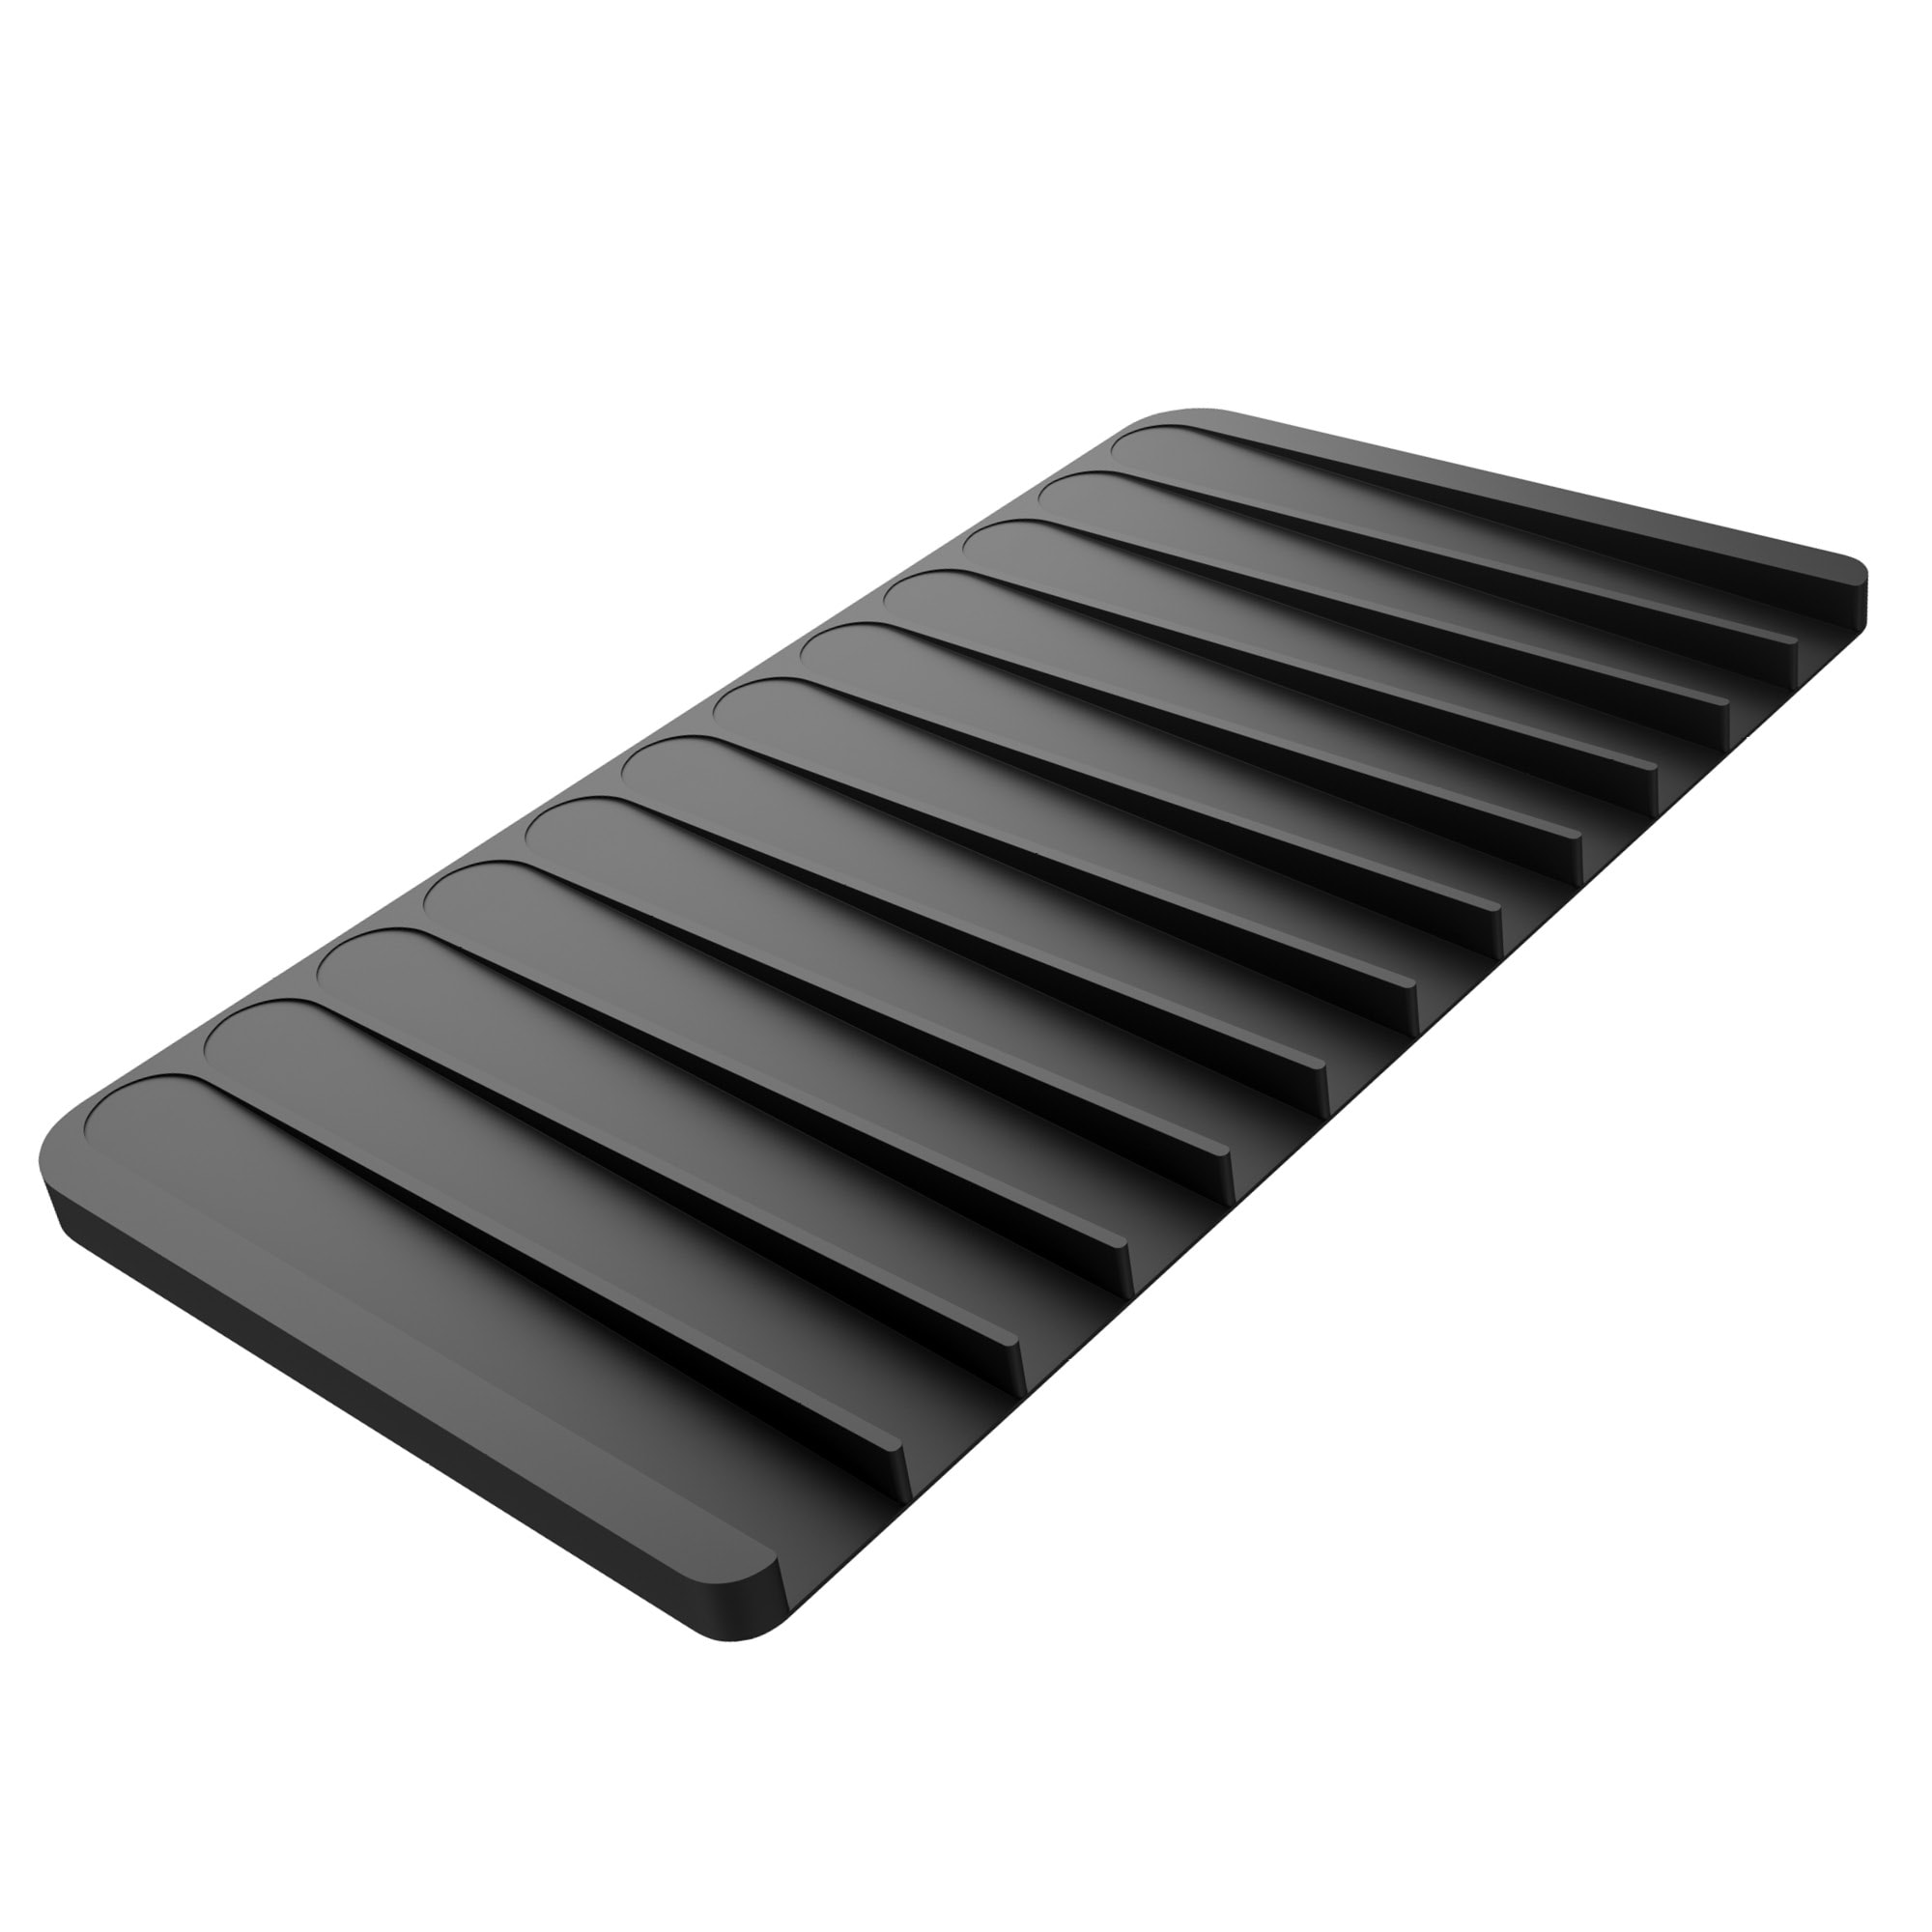 Silicone Sink Mat 24.8 inchx 13 inch Kitchen Sink Protector Grid Accessory with Center Drain Non-Slip Foldable Sink Mat for Bottom of Farmhouse